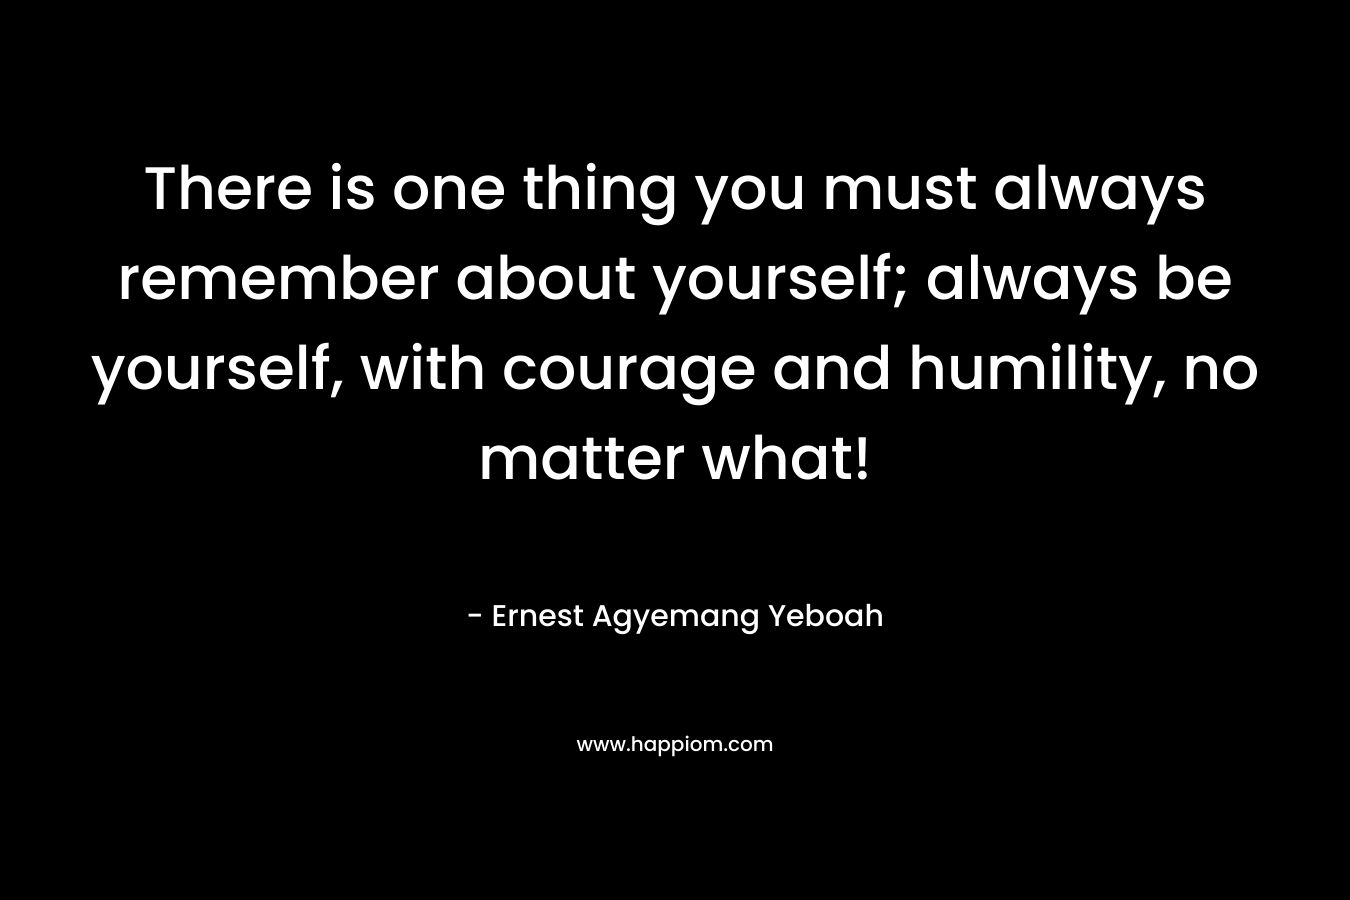 There is one thing you must always remember about yourself; always be yourself, with courage and humility, no matter what!